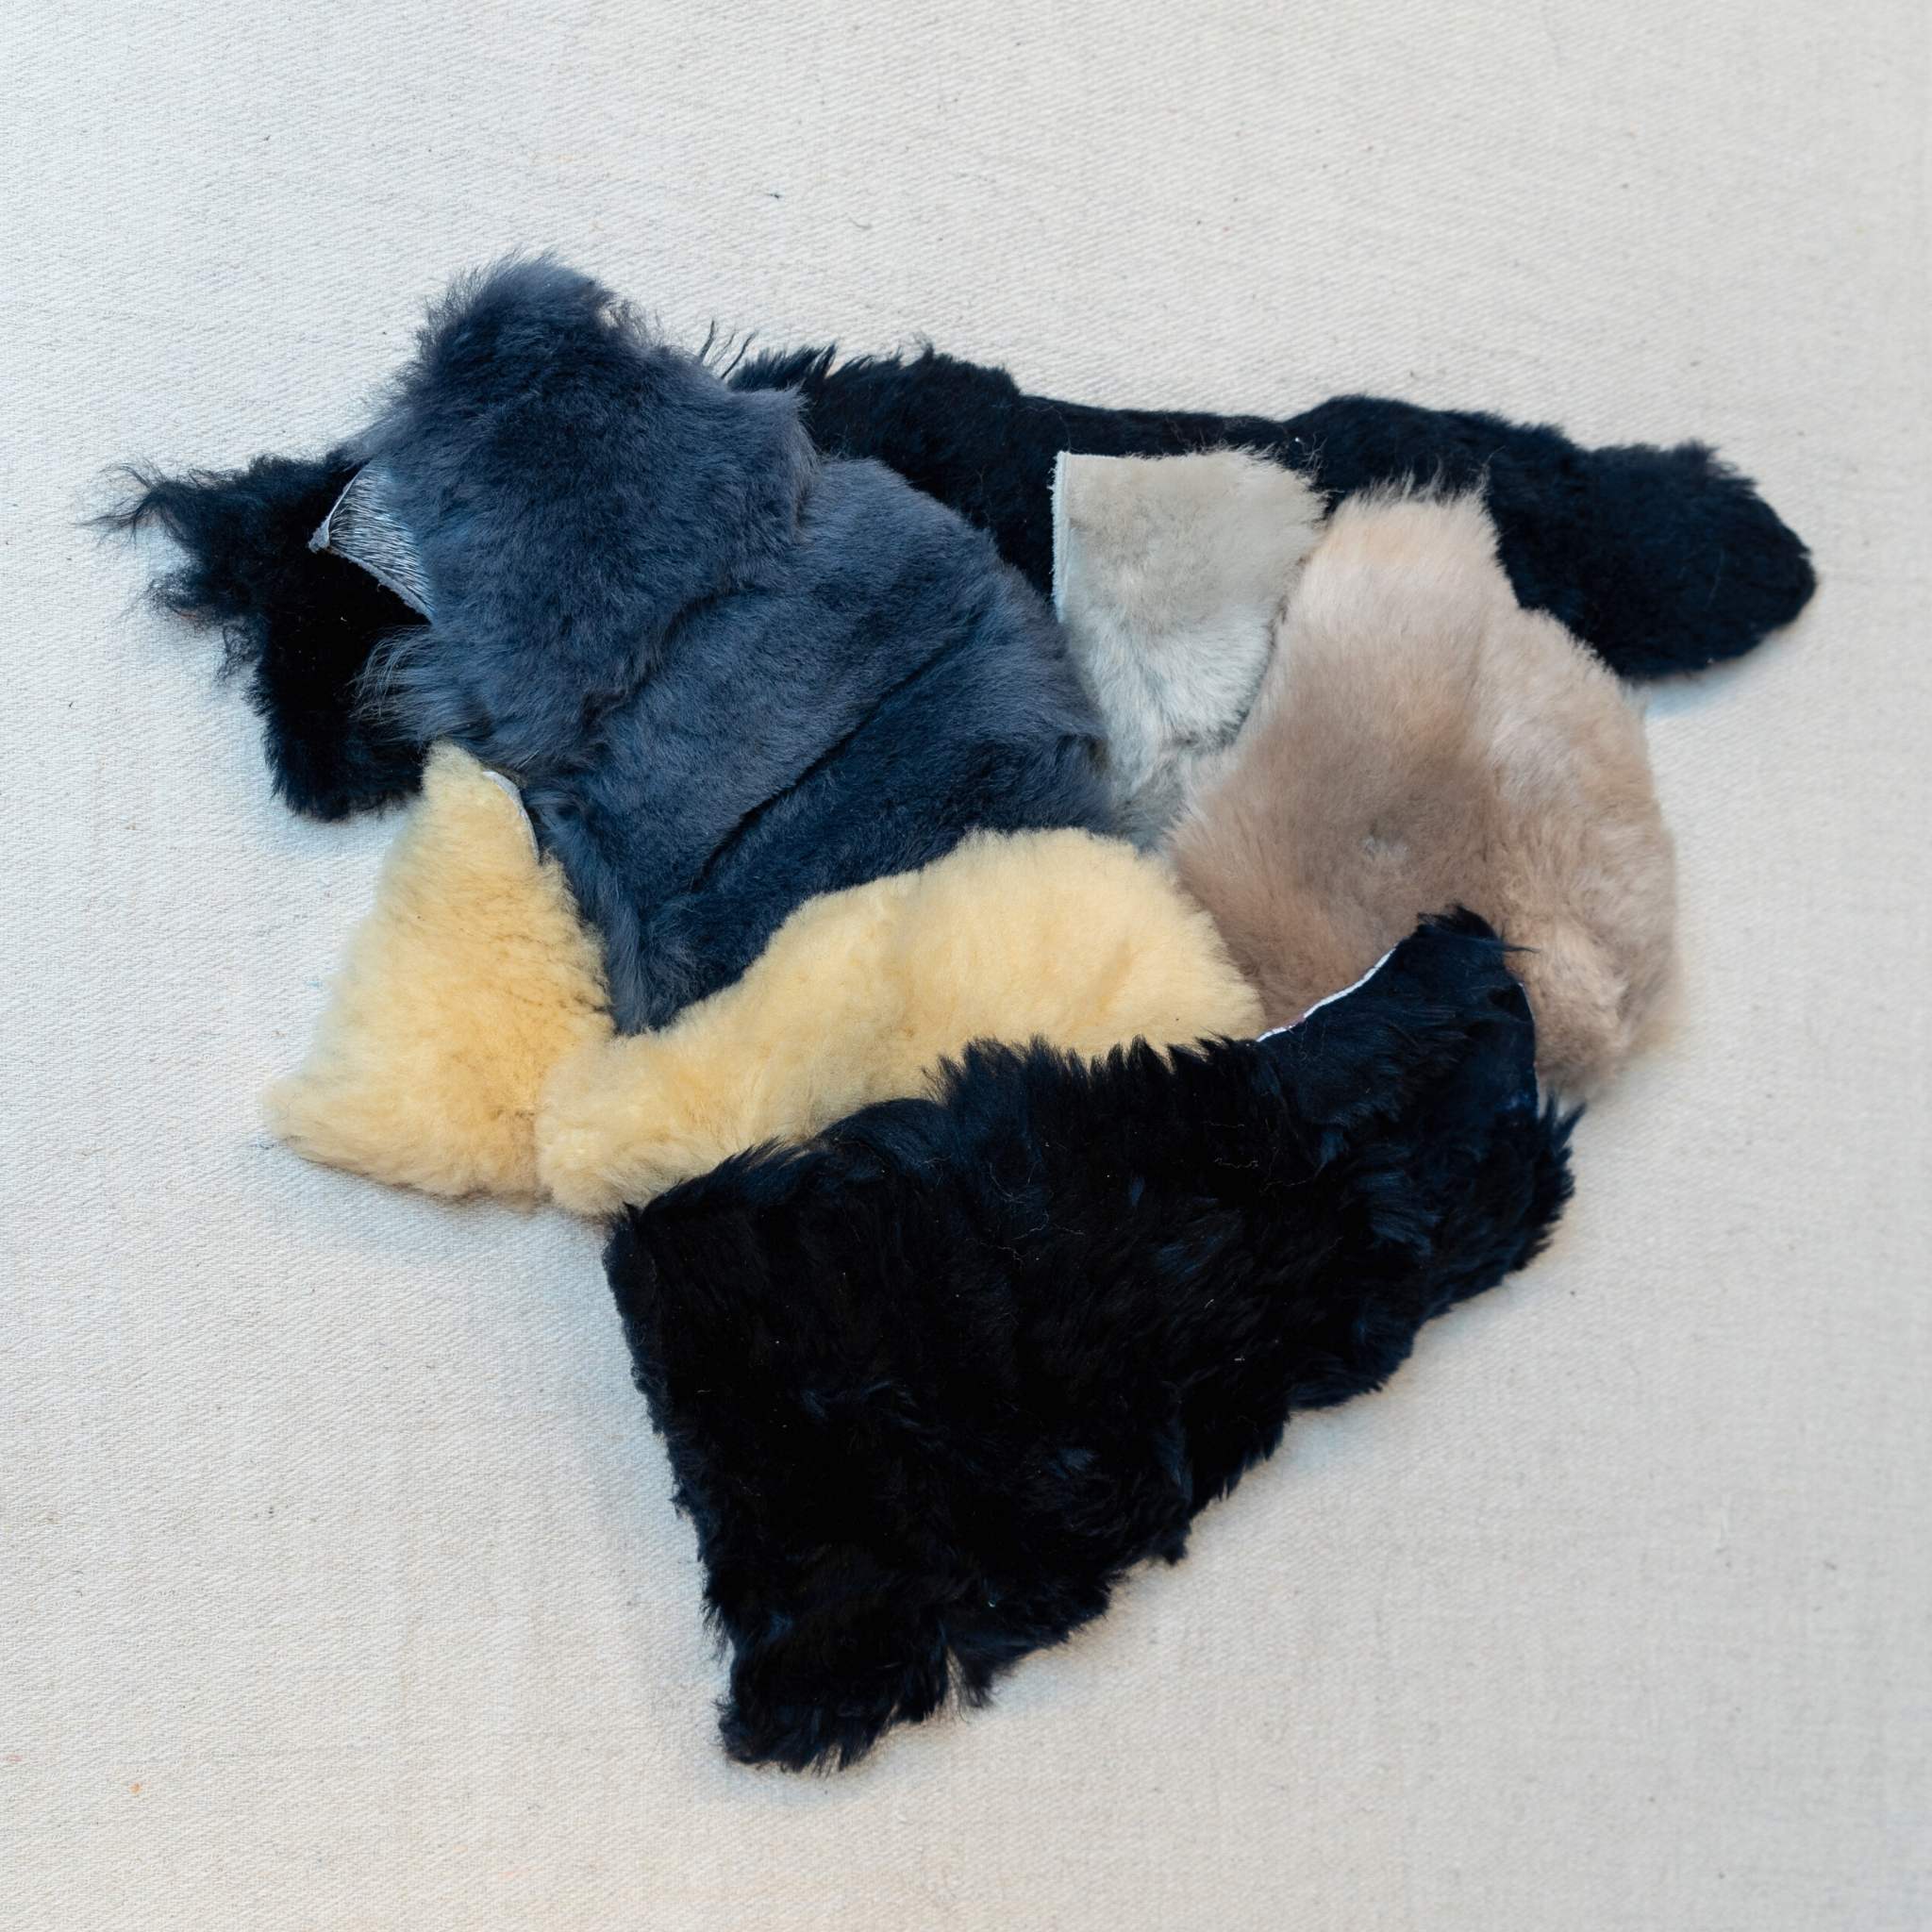 Sheep Wool Pieces - Deep Pile from Identity Leathercraft ideal for dyeing, buffing, padding, repairs